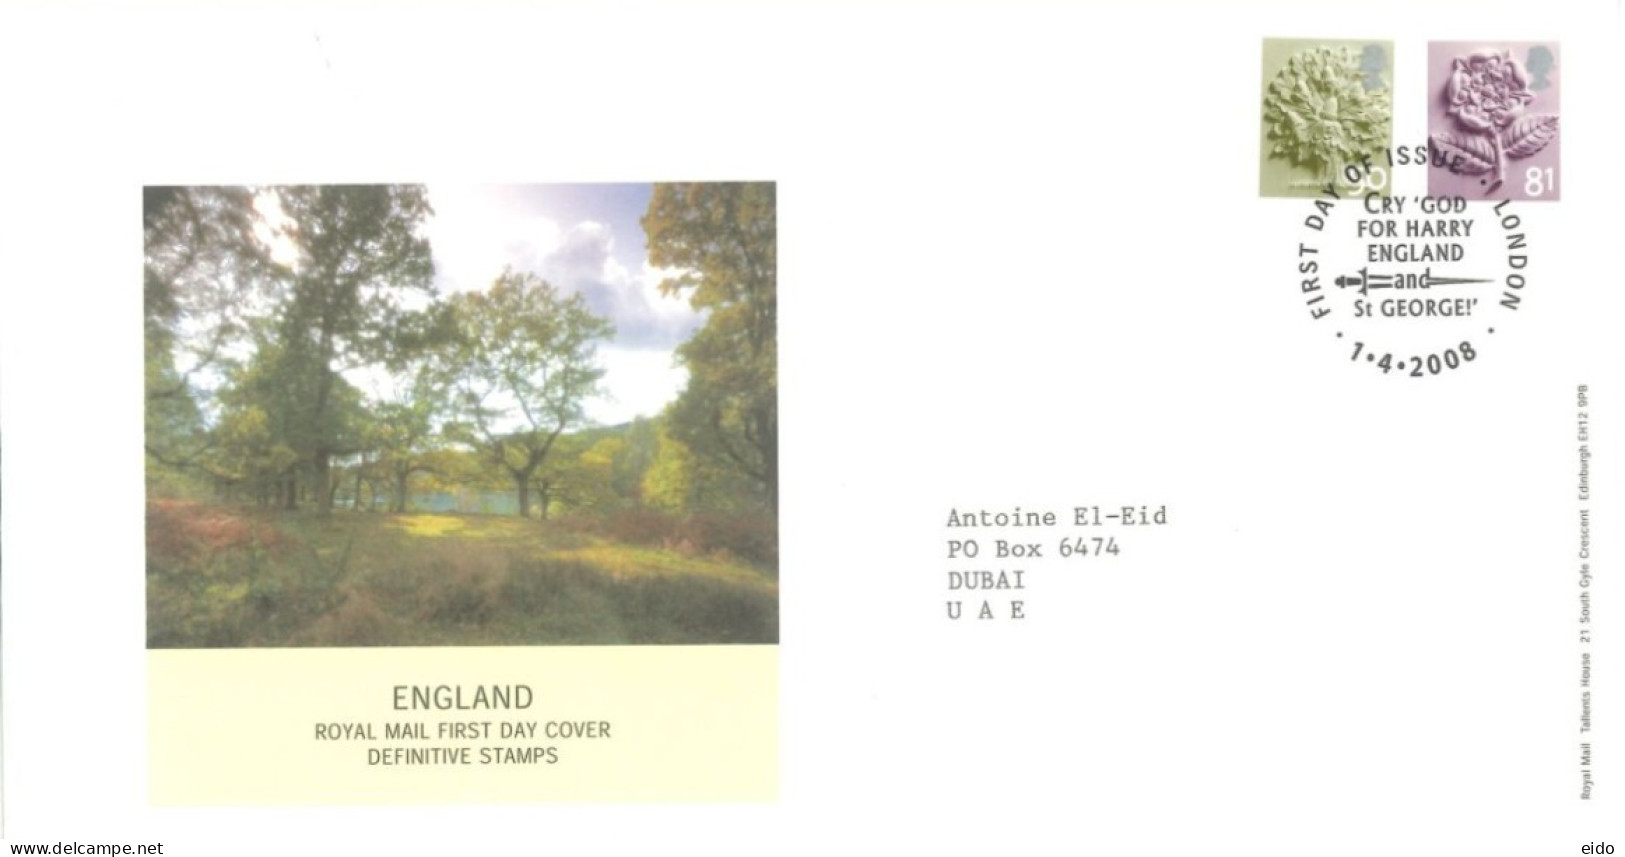 GREAT BRITAIN - 2008, FDC OF ENGLAND ROYAL MAIL DEFINITIVE STAMPS. - Covers & Documents